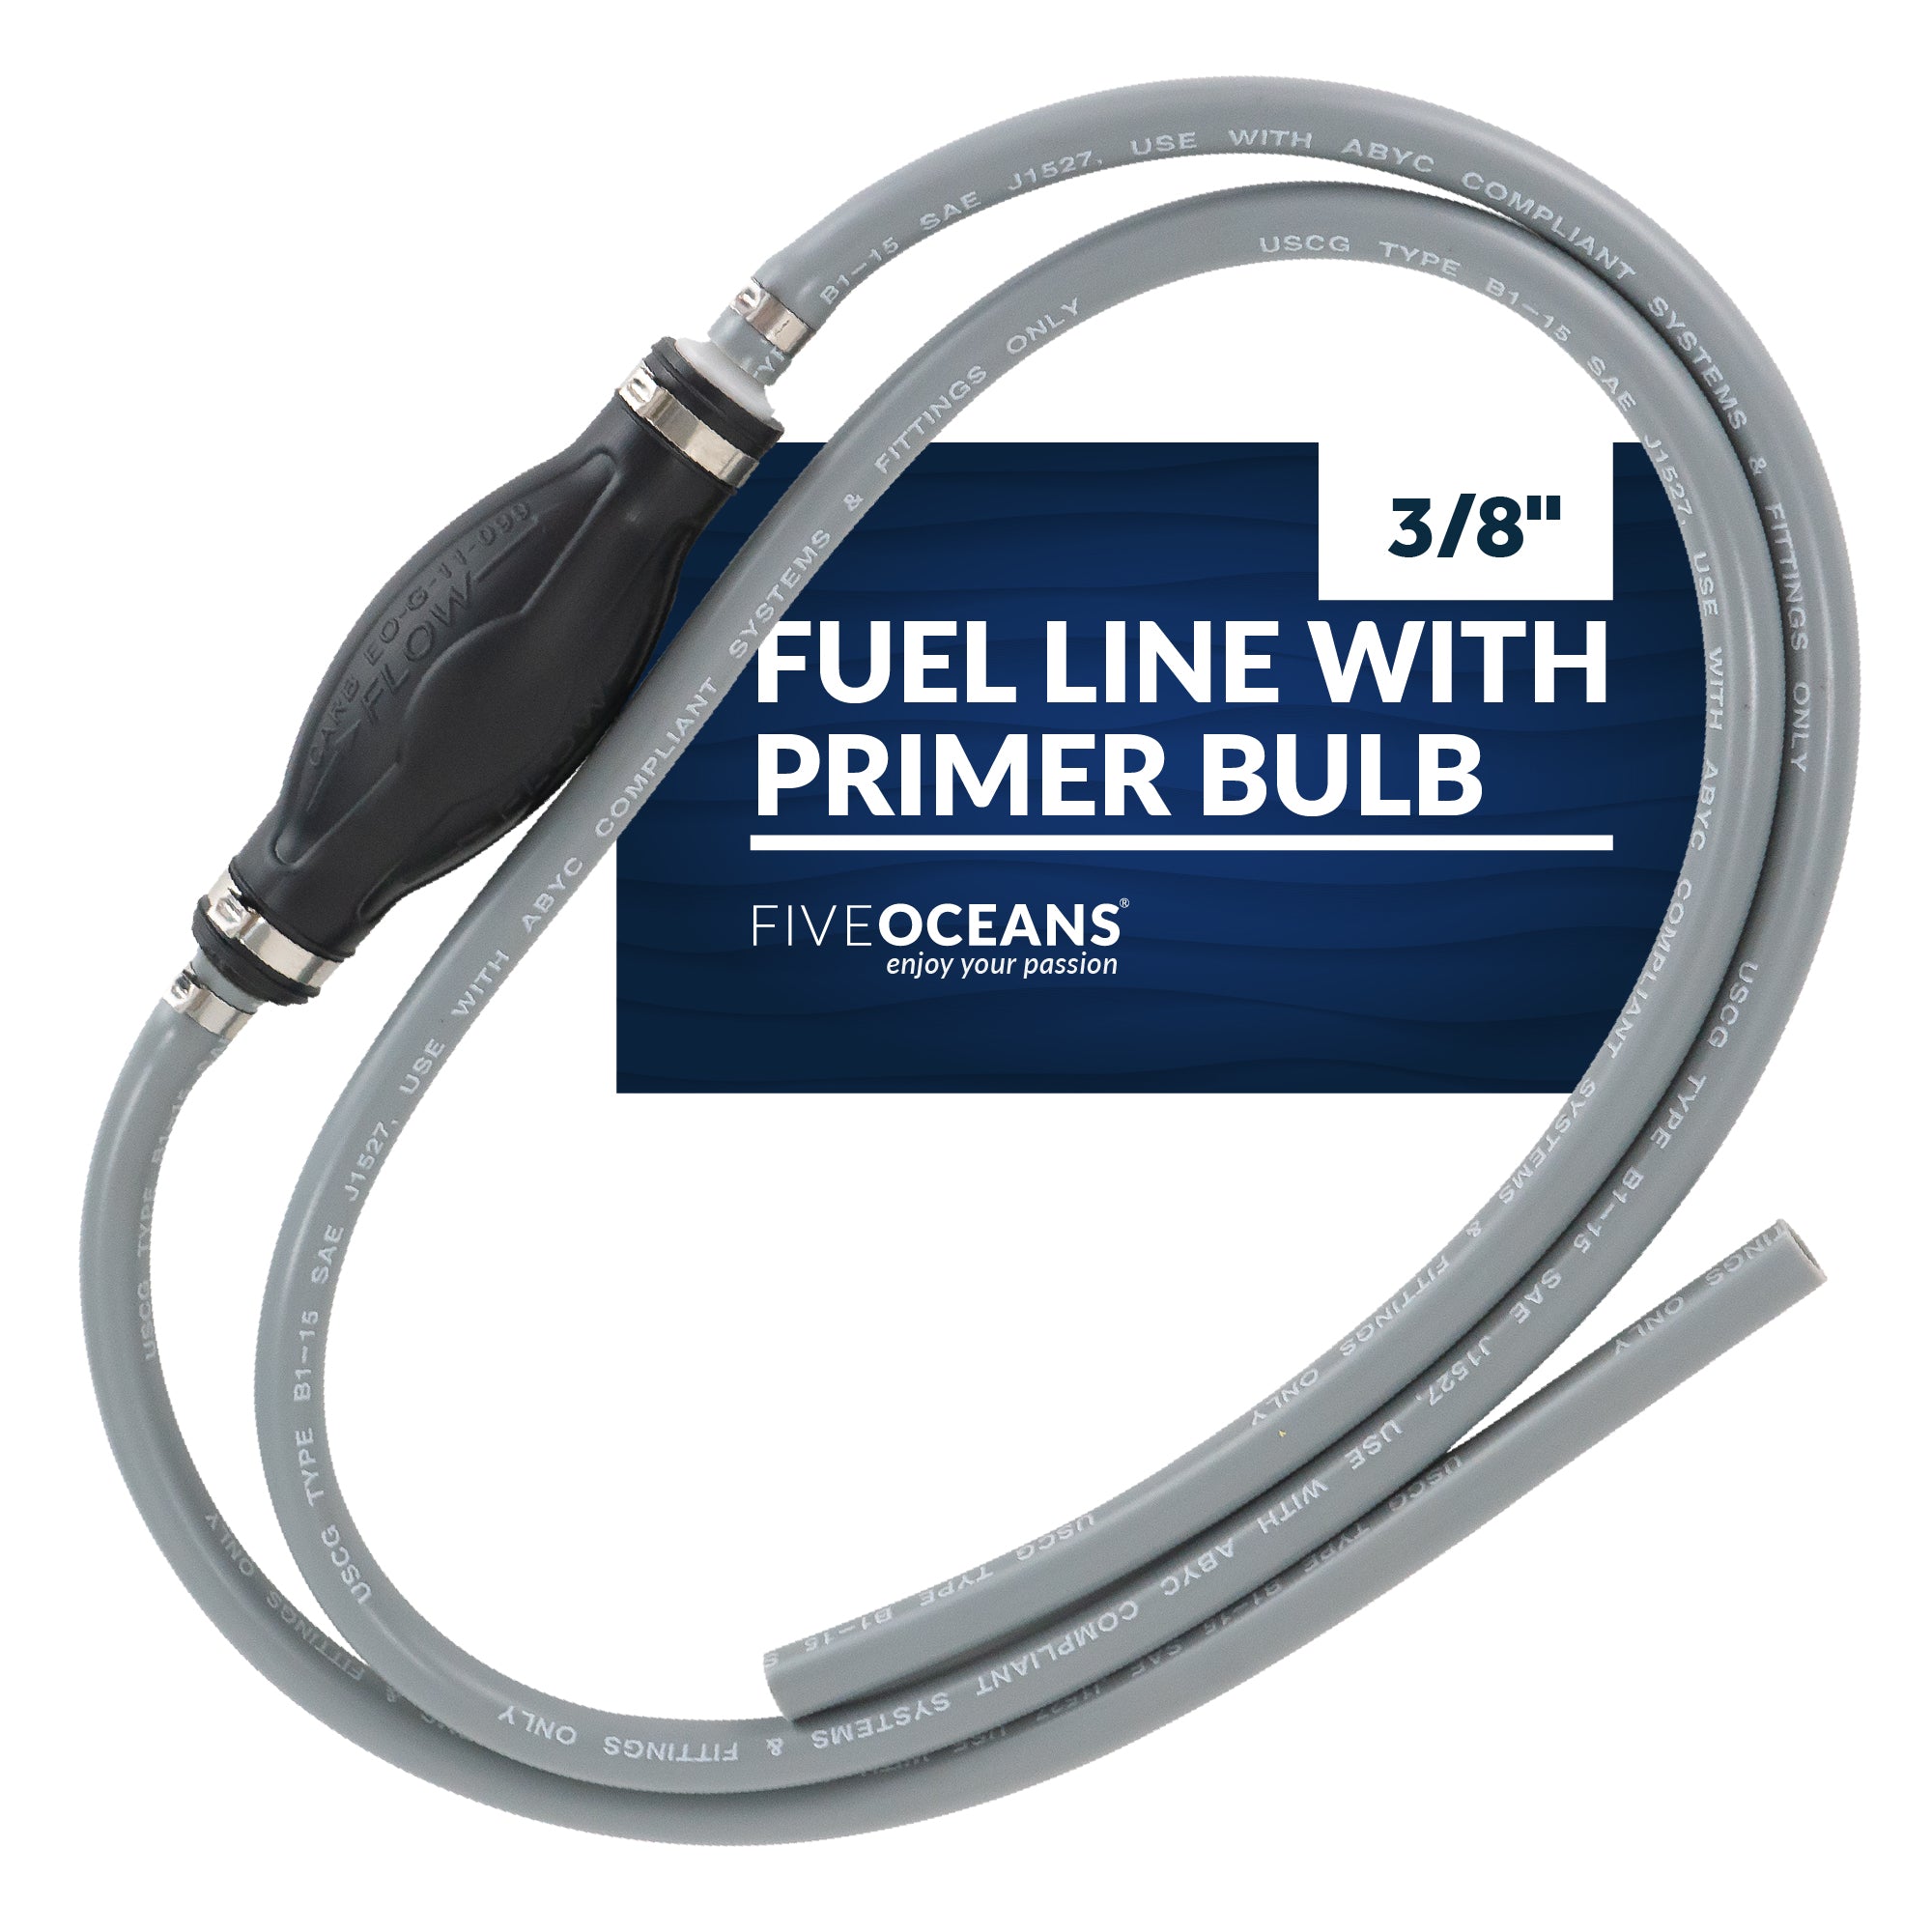 3/8" Outboard Motor Fuel Line with Primer Bulb, Universal,  Hose x 6' Long, EPA/CARB - FO4280